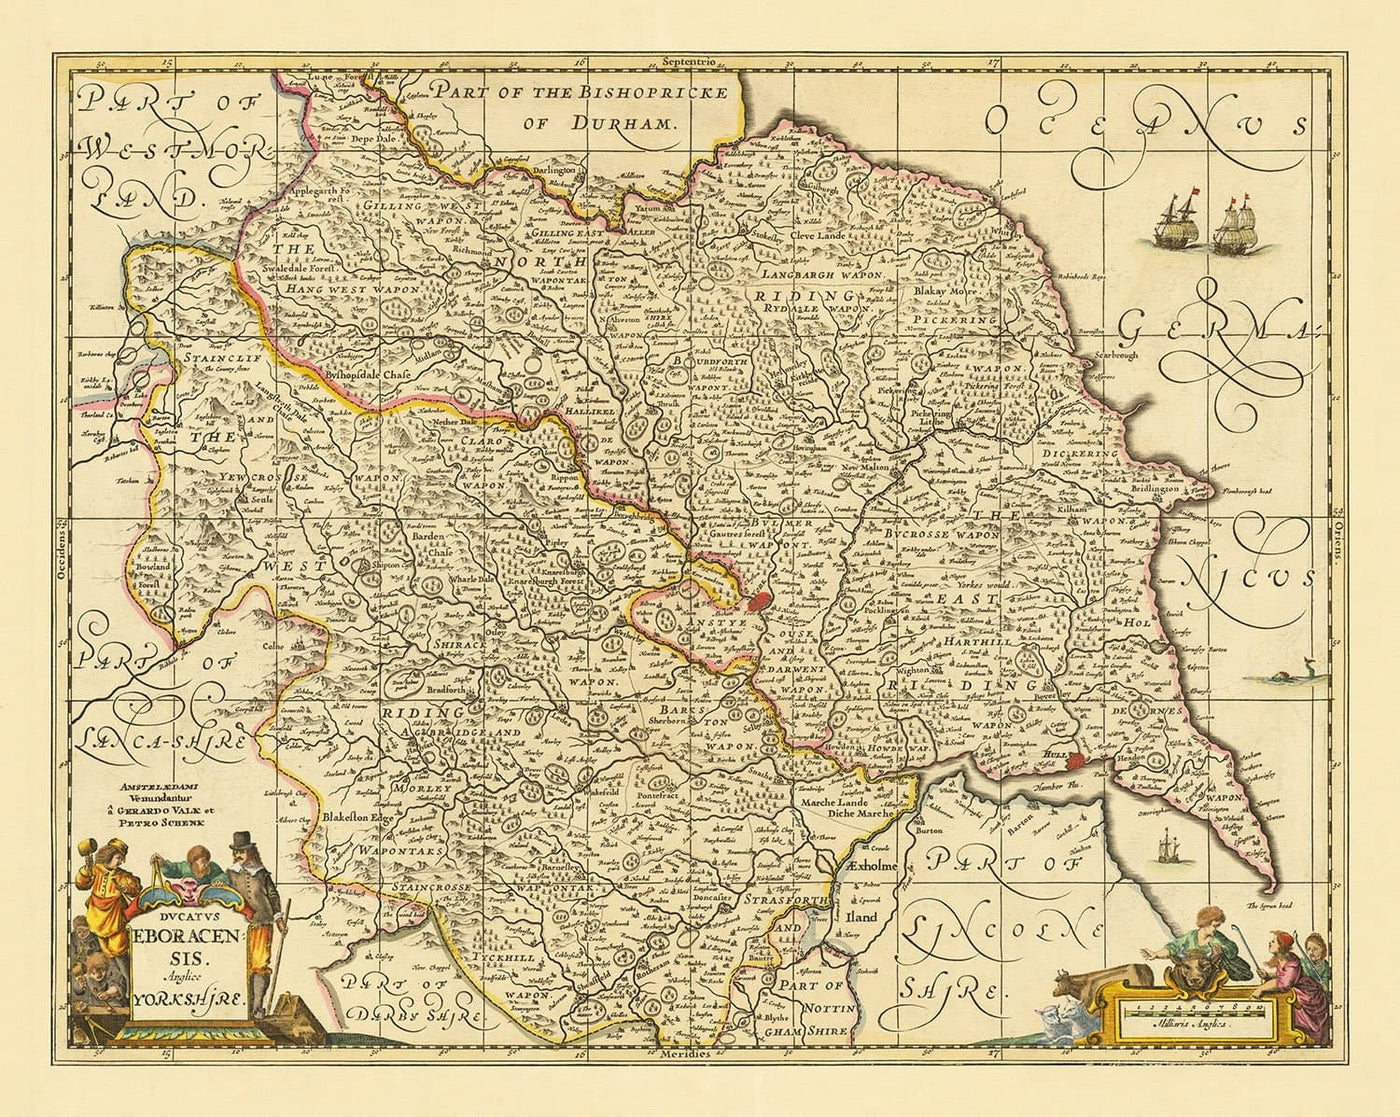 Old Map of Yorkshire, 1690 - York, Leeds, Sheffield, Rotherham, Doncaster, Middlesbrough, Hull, Whitby, Humber